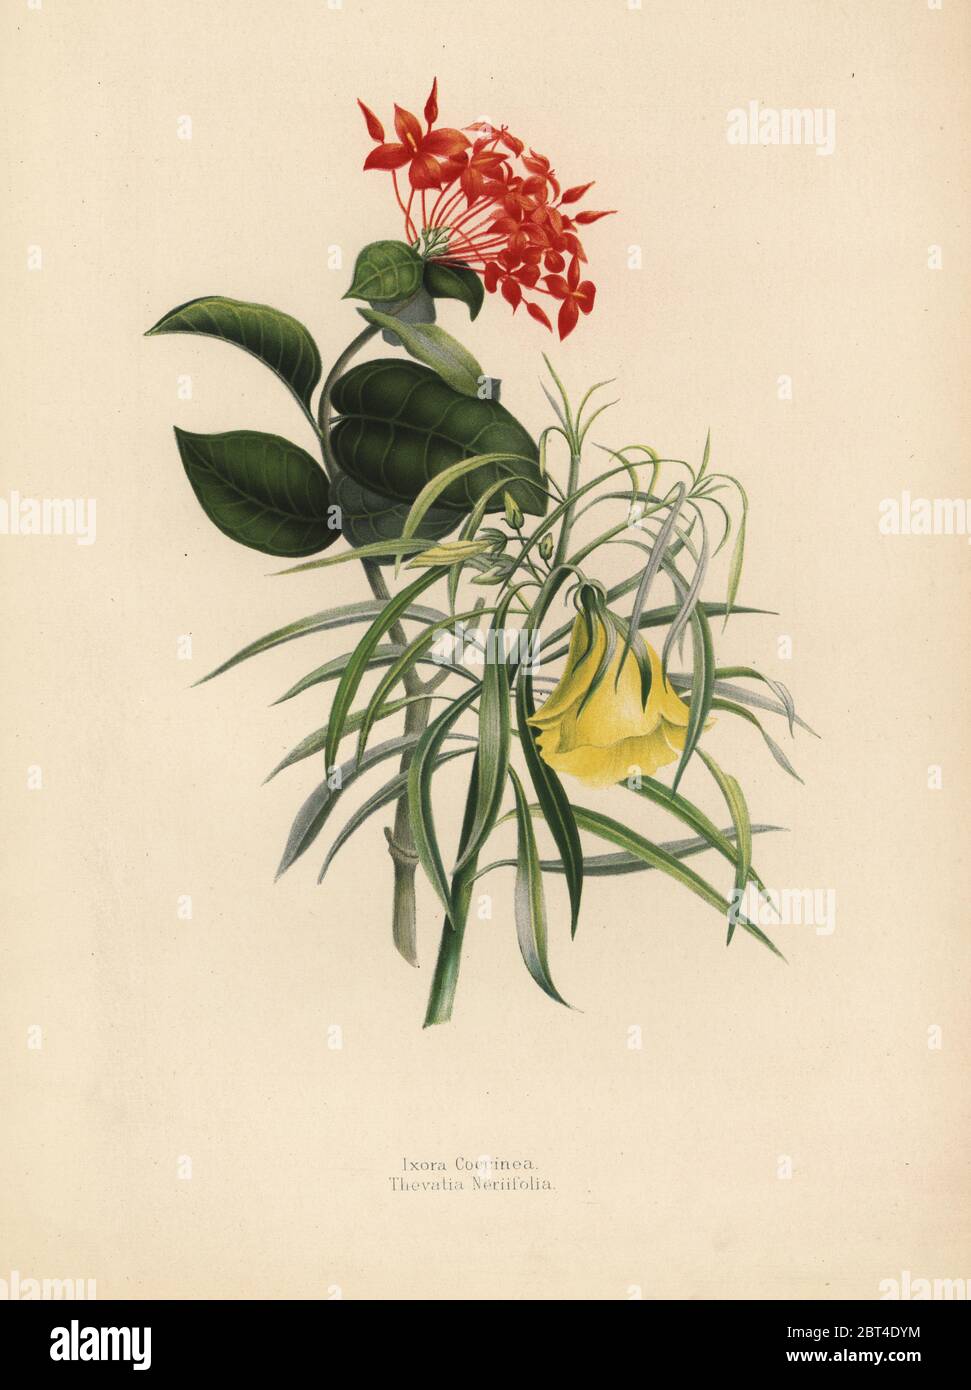 Jungle geranium, Ixora coccinea, and yellow oleander, Thevetia neriifolia, Cascabela thevetia. Chromolithograph after a botanical drawing by Emily Eden from her Flowers from an Indian Garden: Second Series: Hope, Breidenbach & Co, Dusseldorf, 1860s. Eden was an English female aristocratic writer, novelist and traveler who accompanied her brother George in India from 1836 to 1842. Stock Photo